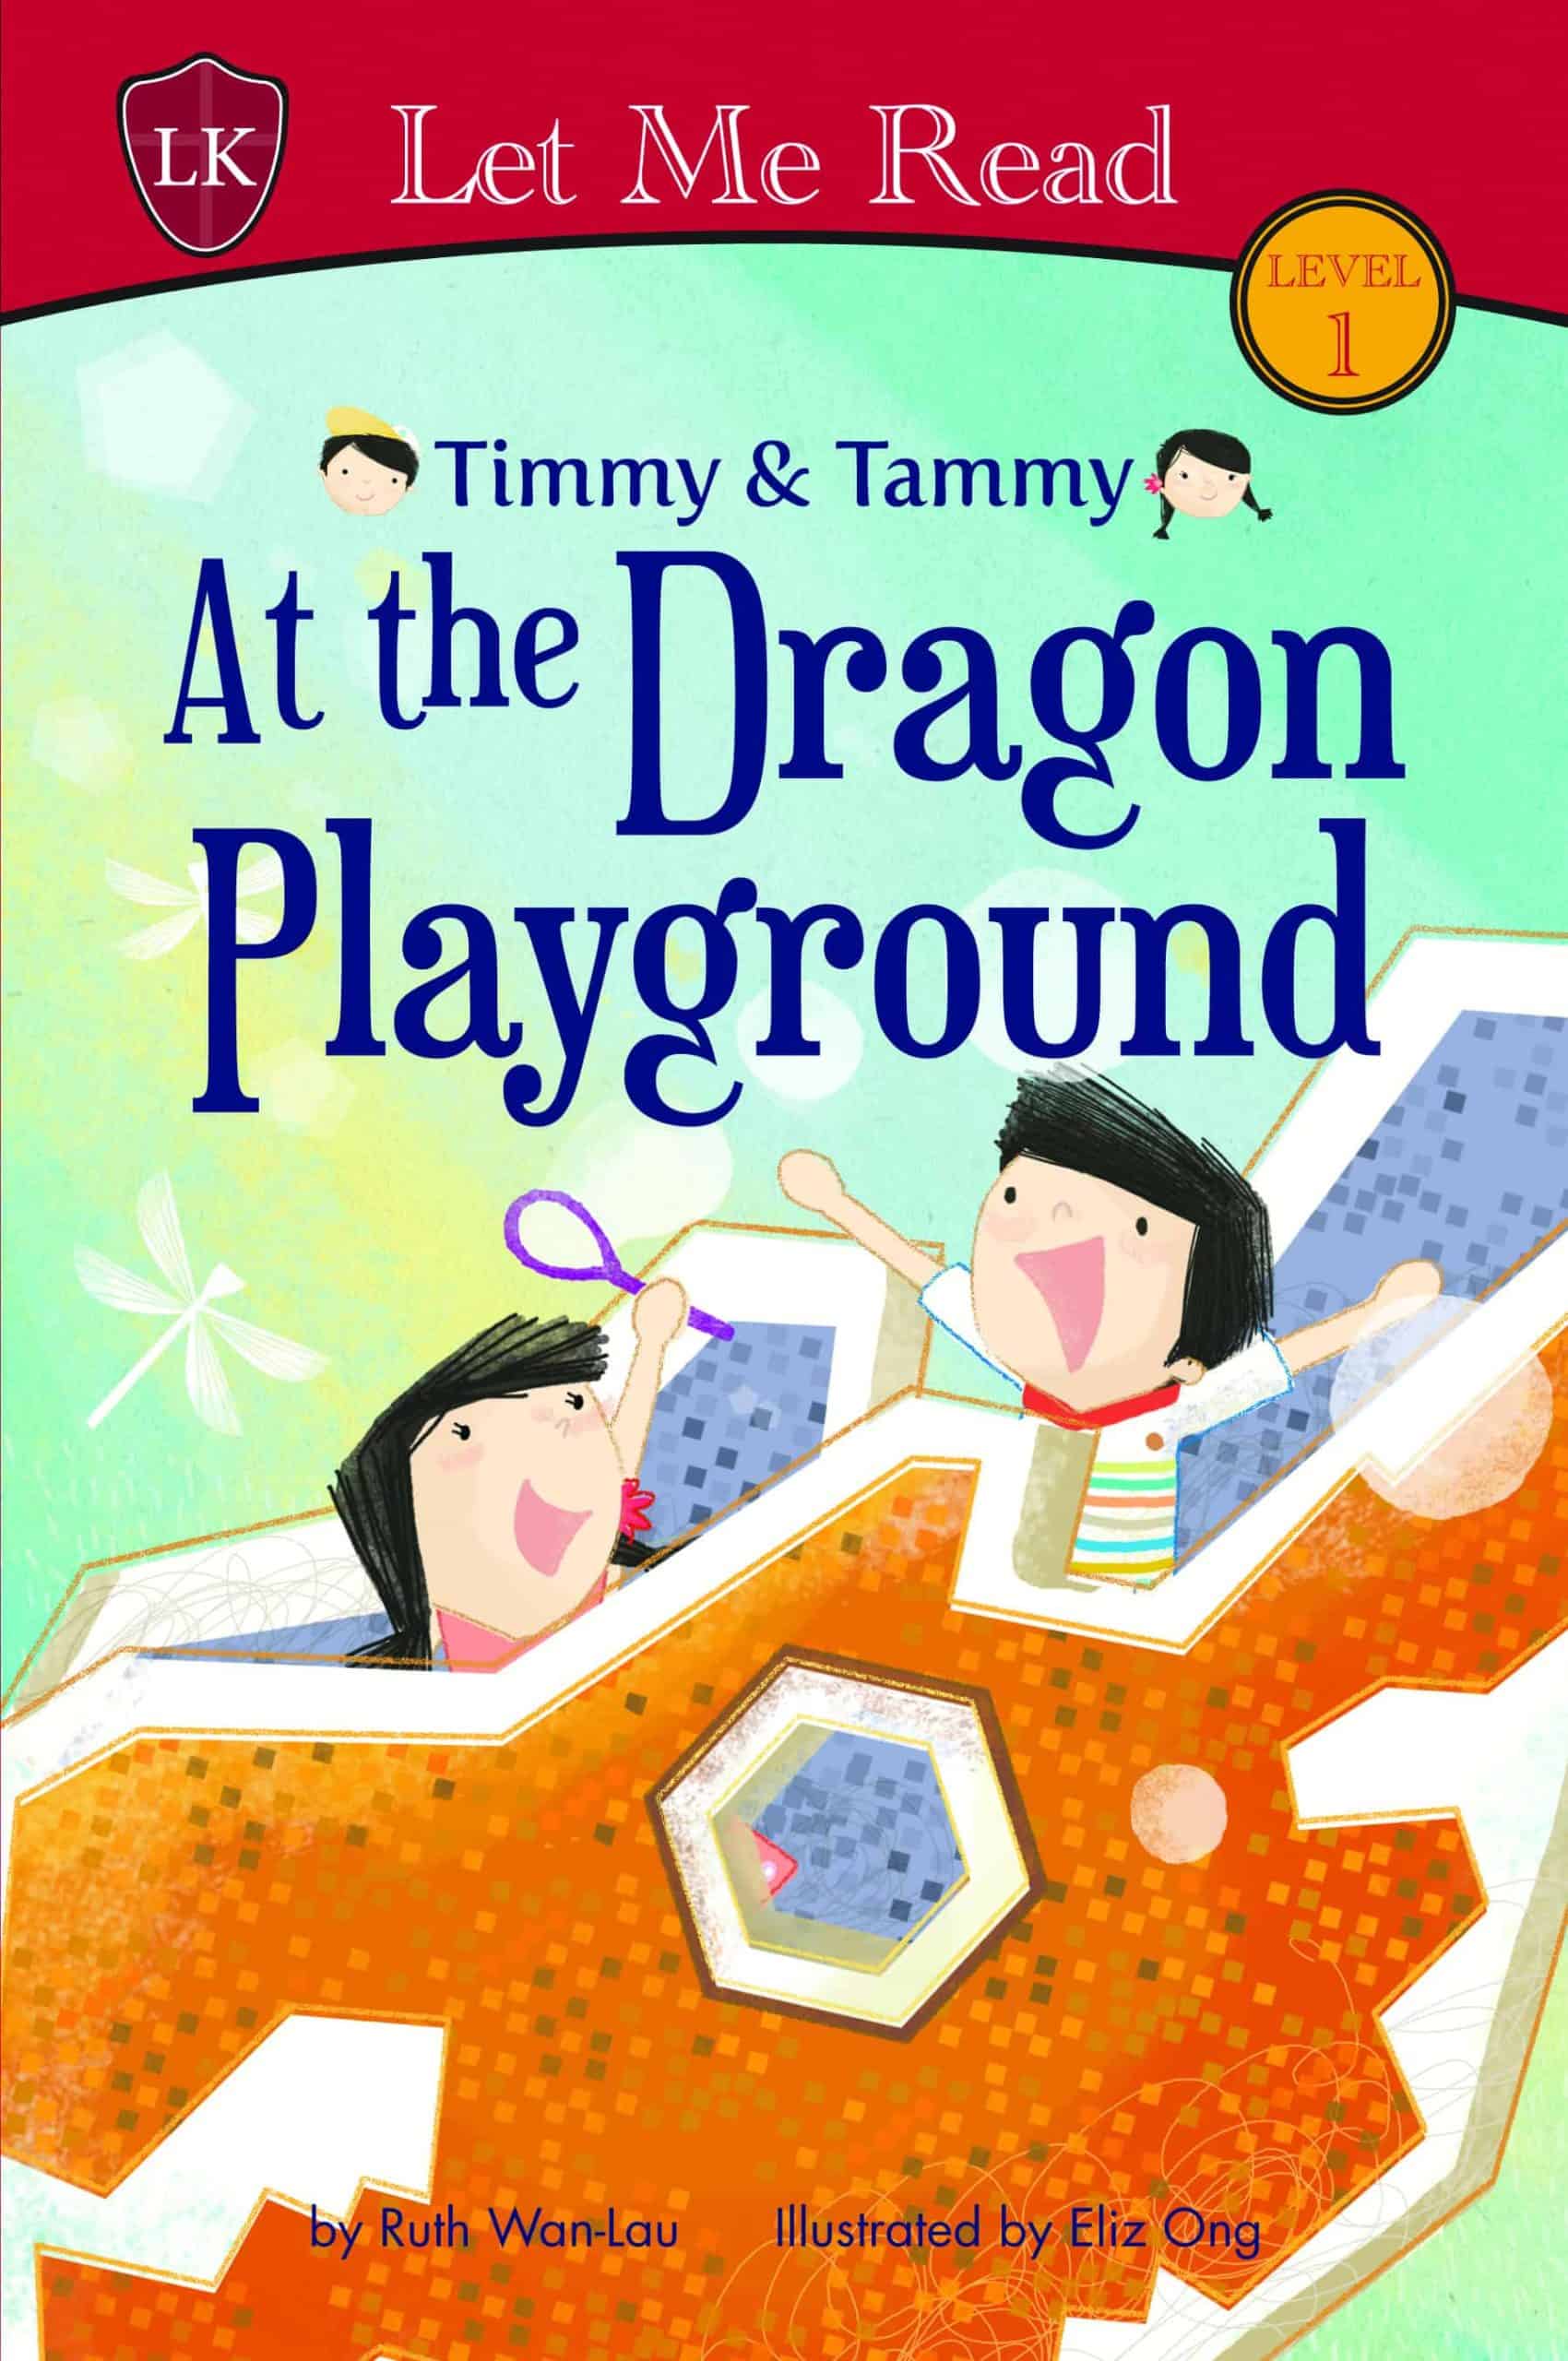 Timmy & Tammy (Level 1): At the Dragon Playground